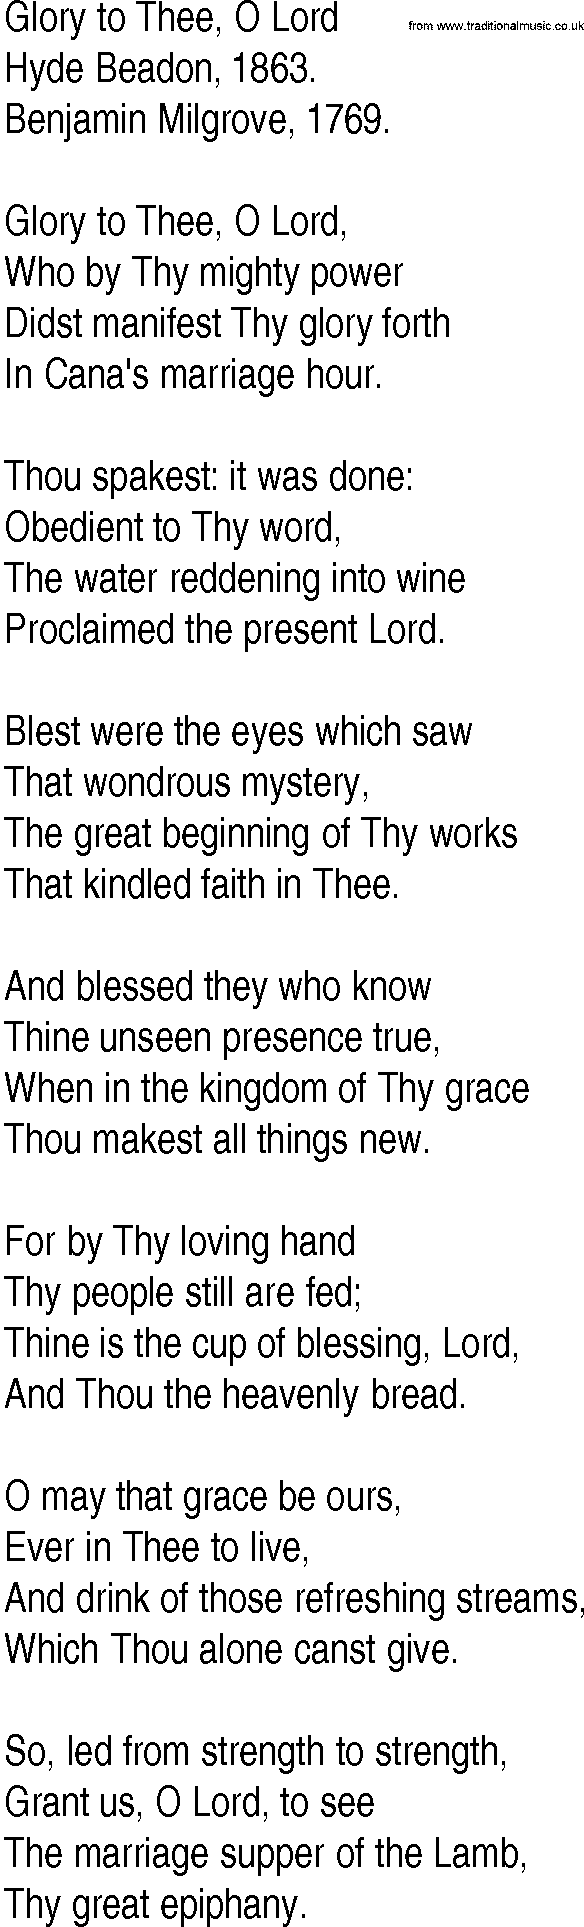 Hymn and Gospel Song: Glory to Thee, O Lord by Hyde Beadon lyrics